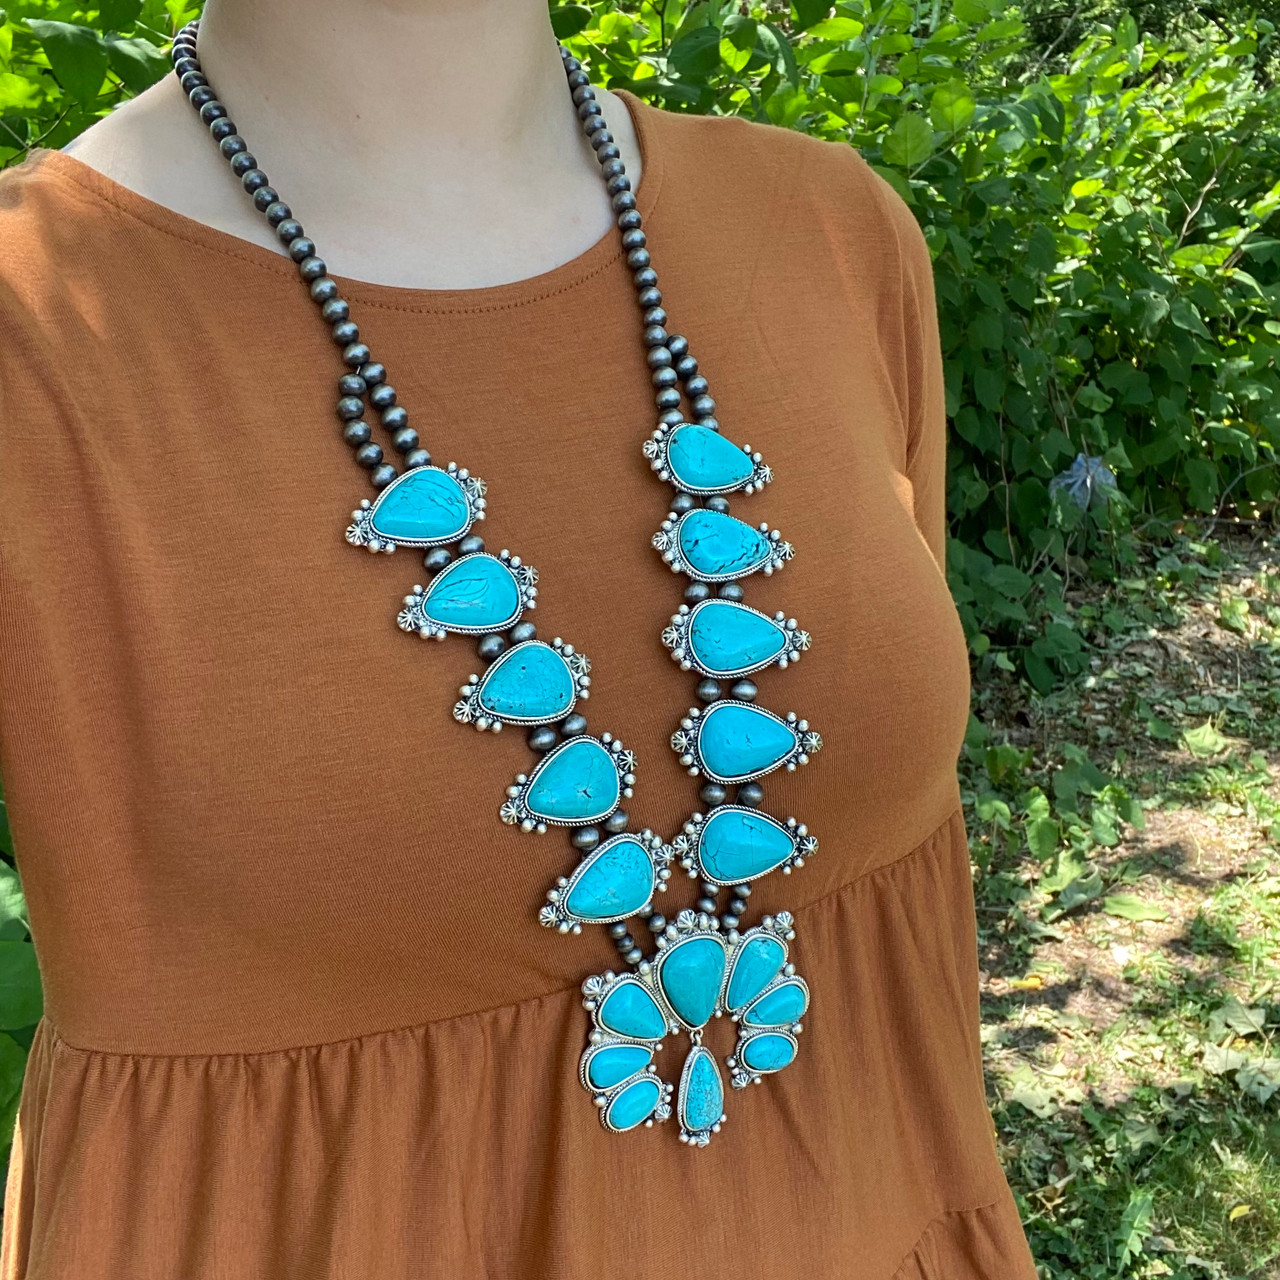 Incredible Vintage Chunky Natural Turquoise Necklace - Woven Earth